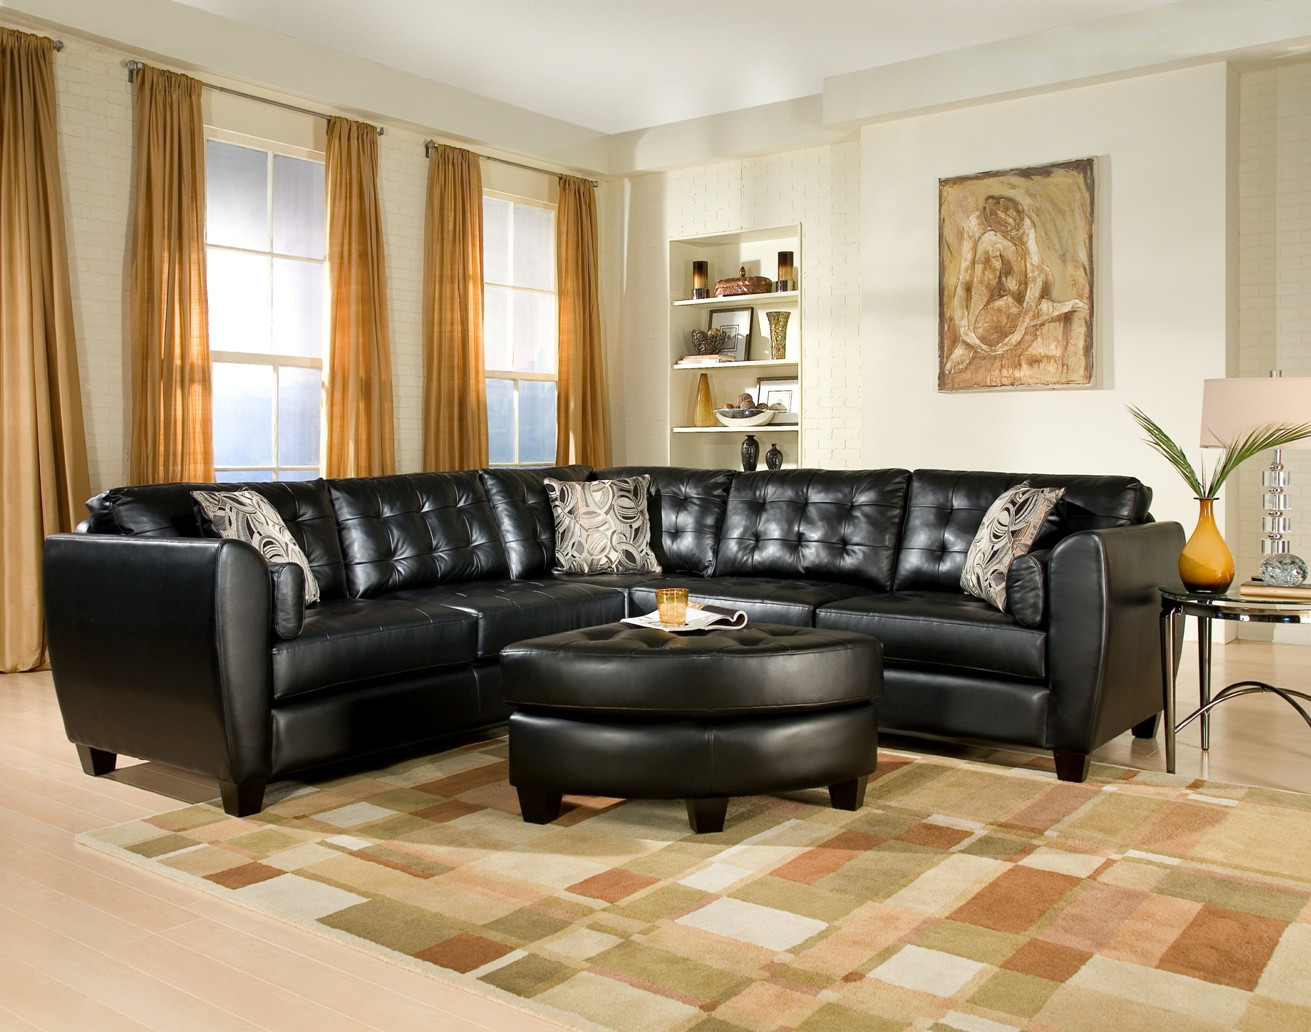 Black Sofa Living Room Ideas
 Living Room Ideas with Sectionals Sofa for Small Living